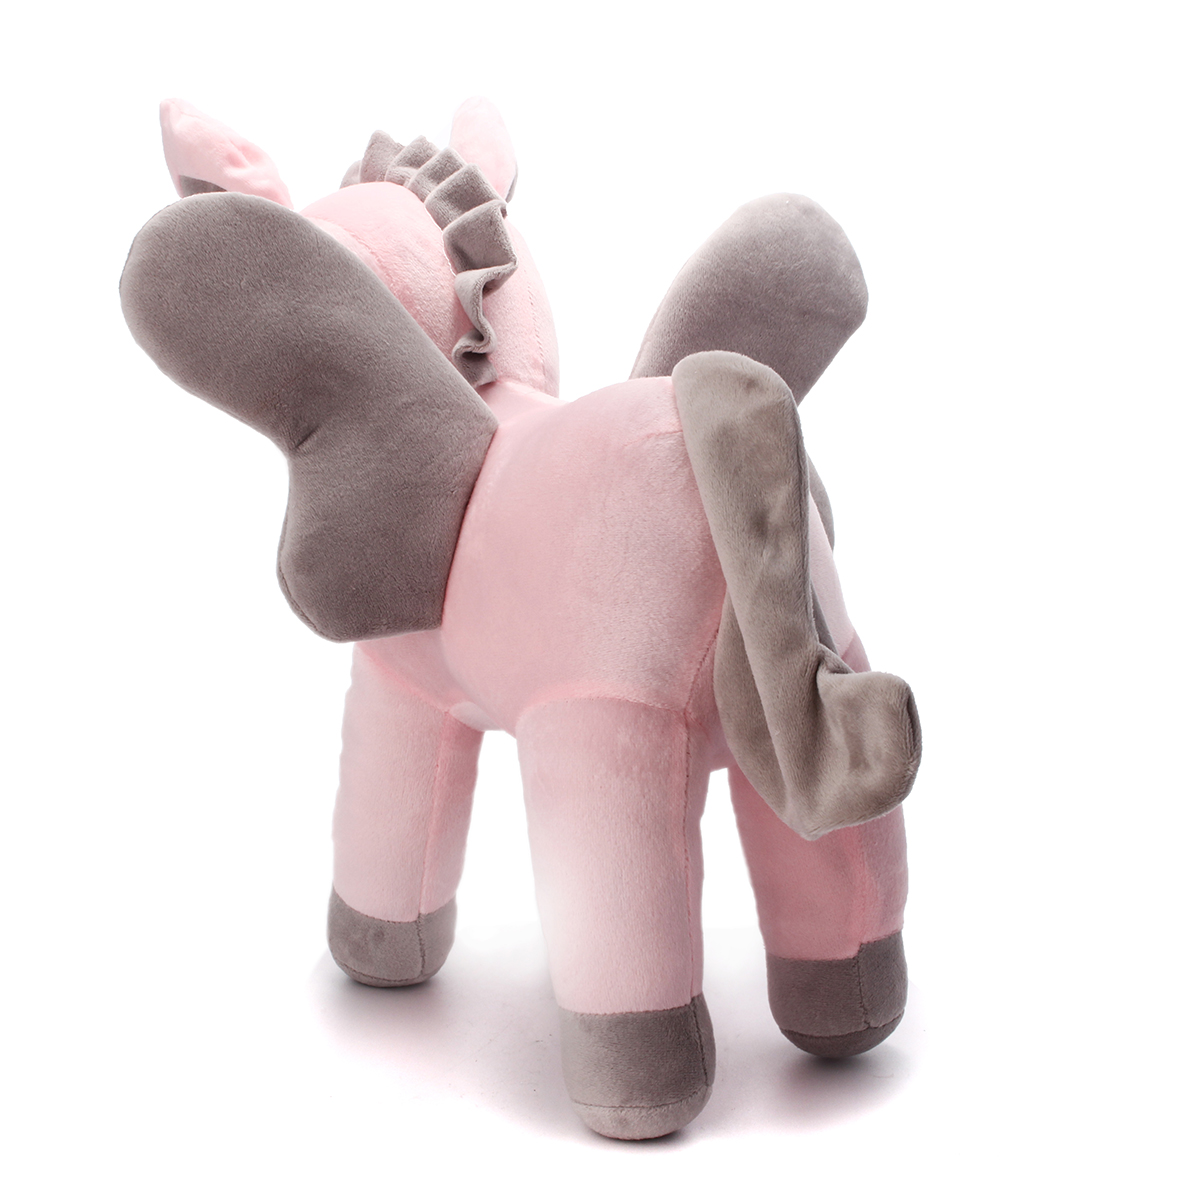 16-Inches-Soft-Giant-Unicorn-Stuffed-Plush-Toy-Animal-Doll-Children-Gifts-Photo-Props-Gift-1299365-4